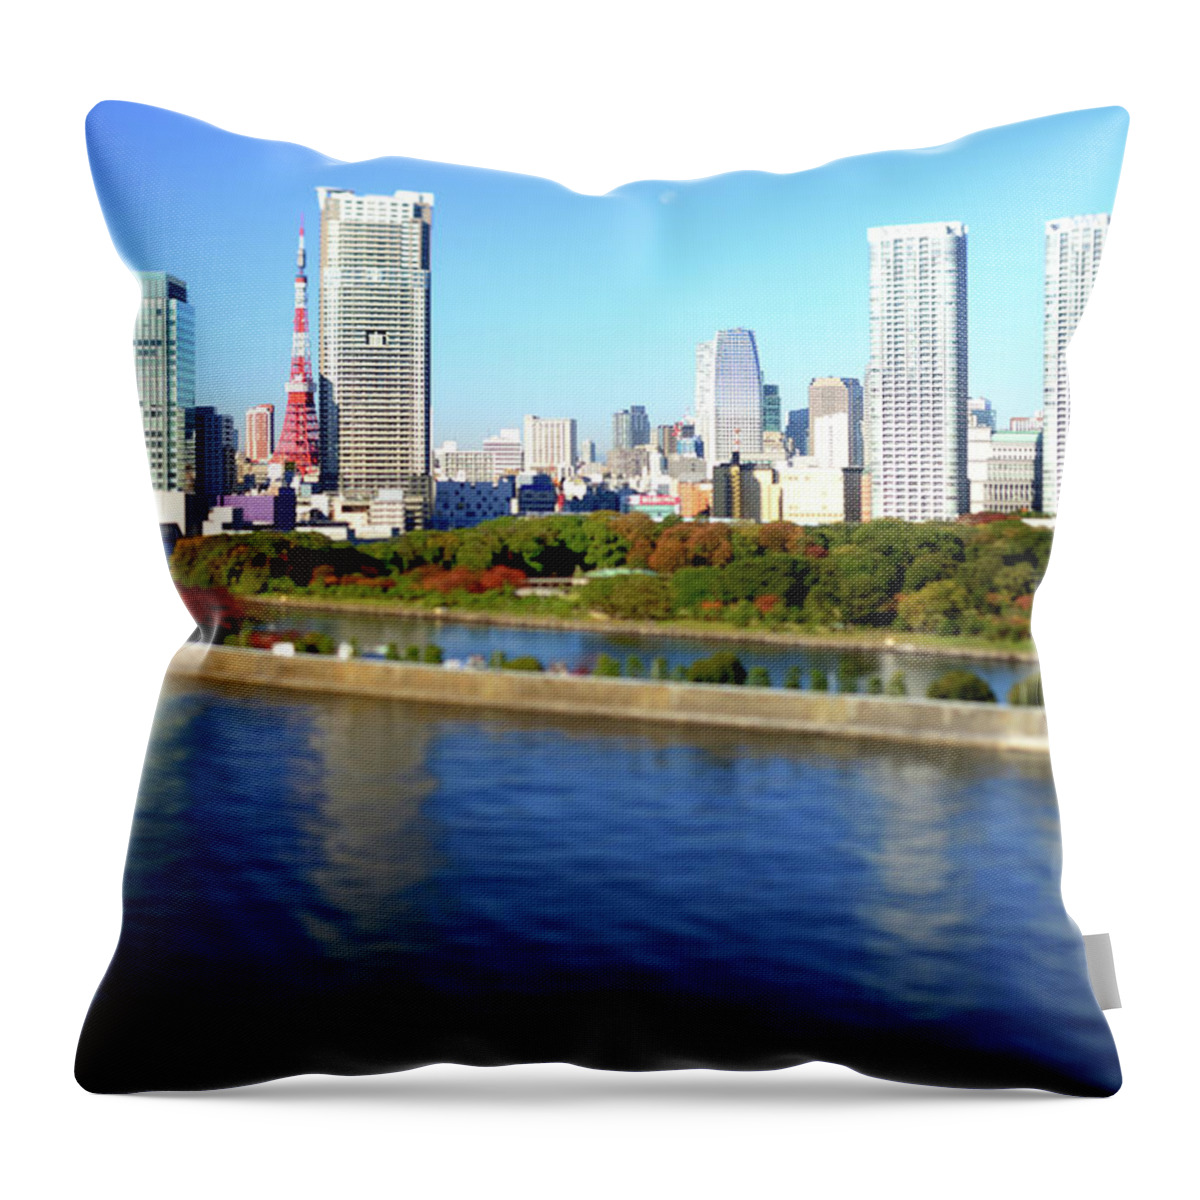 Tokyo Tower Throw Pillow featuring the photograph Tokyo Downtown Cityscape by Vladimir Zakharov